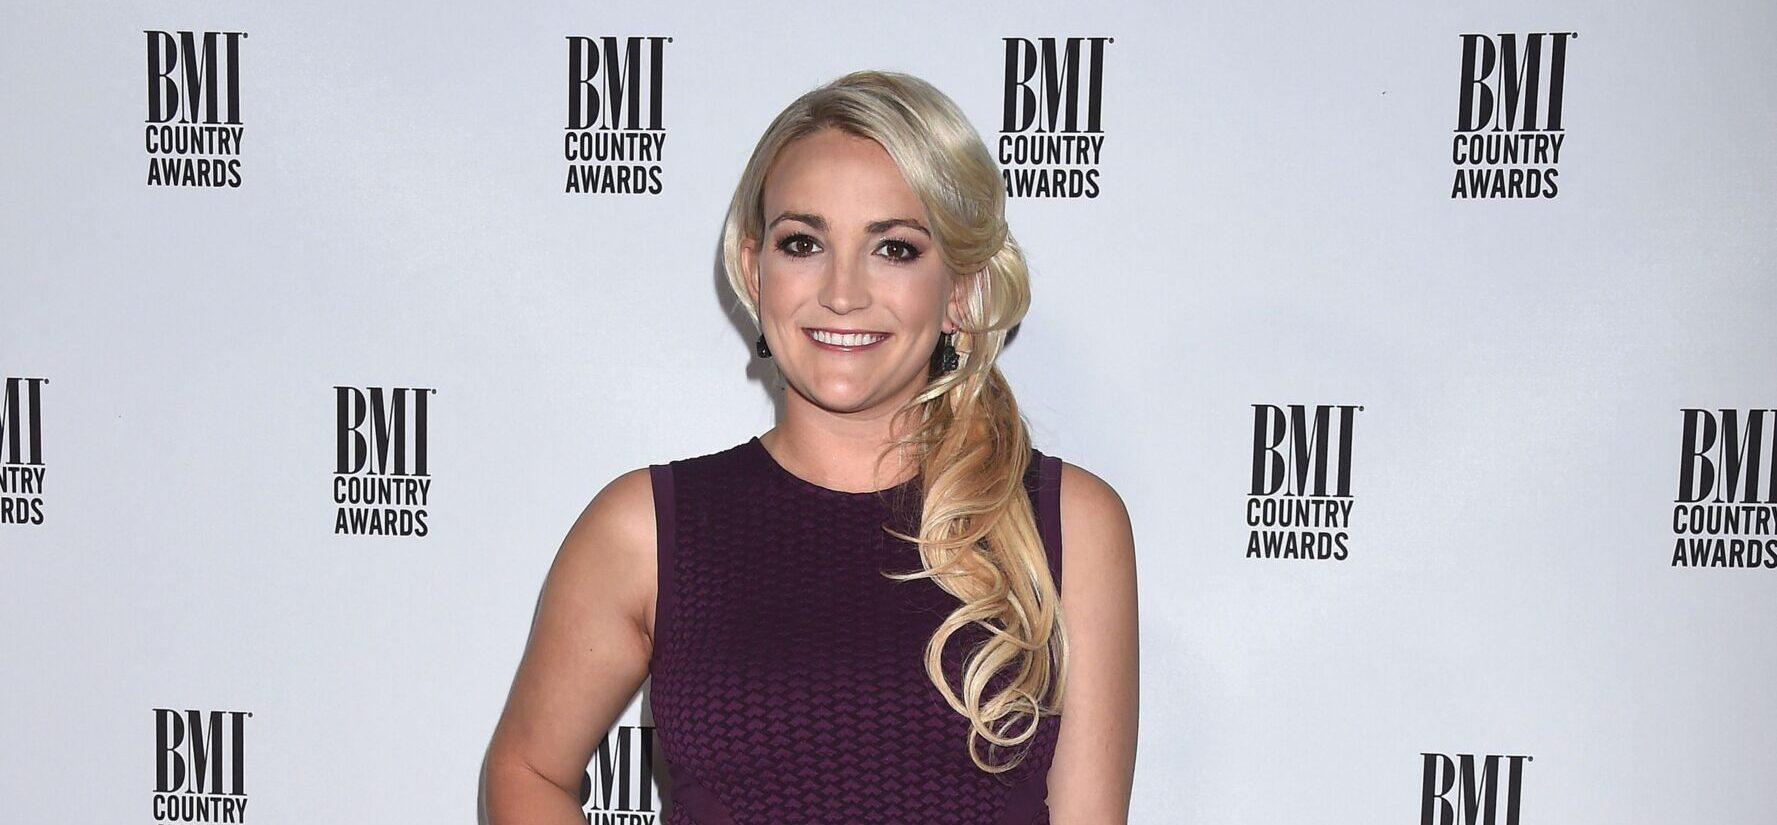 Jamie Lynn Spears Faces Major Backlash For ‘DWTS’ Special Treatment